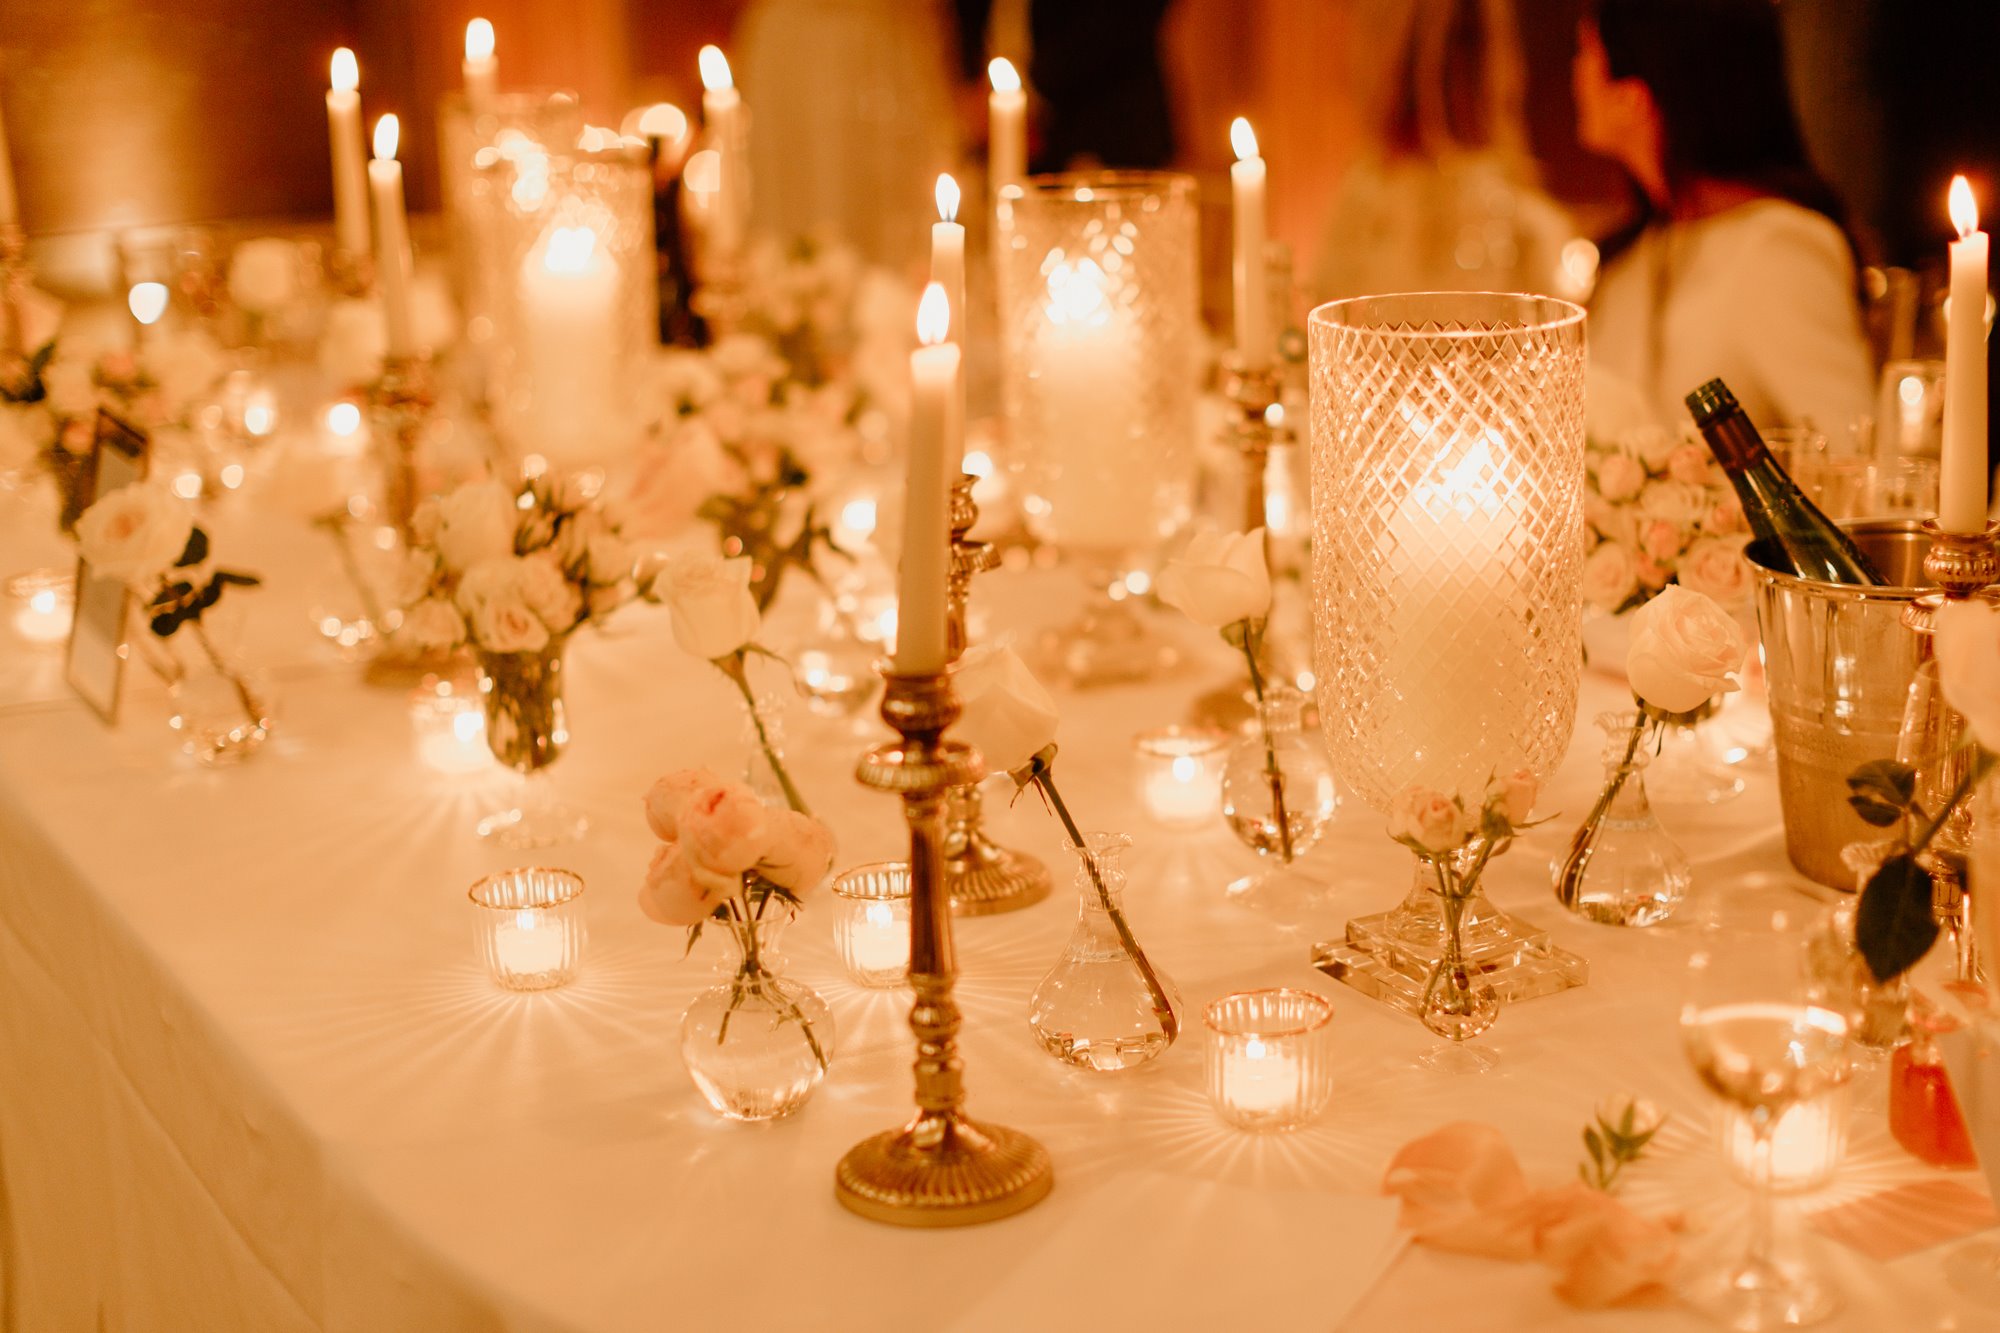 twinkling tea lights lighting up a wedding table with small vases of pink flowers and coolers of wine